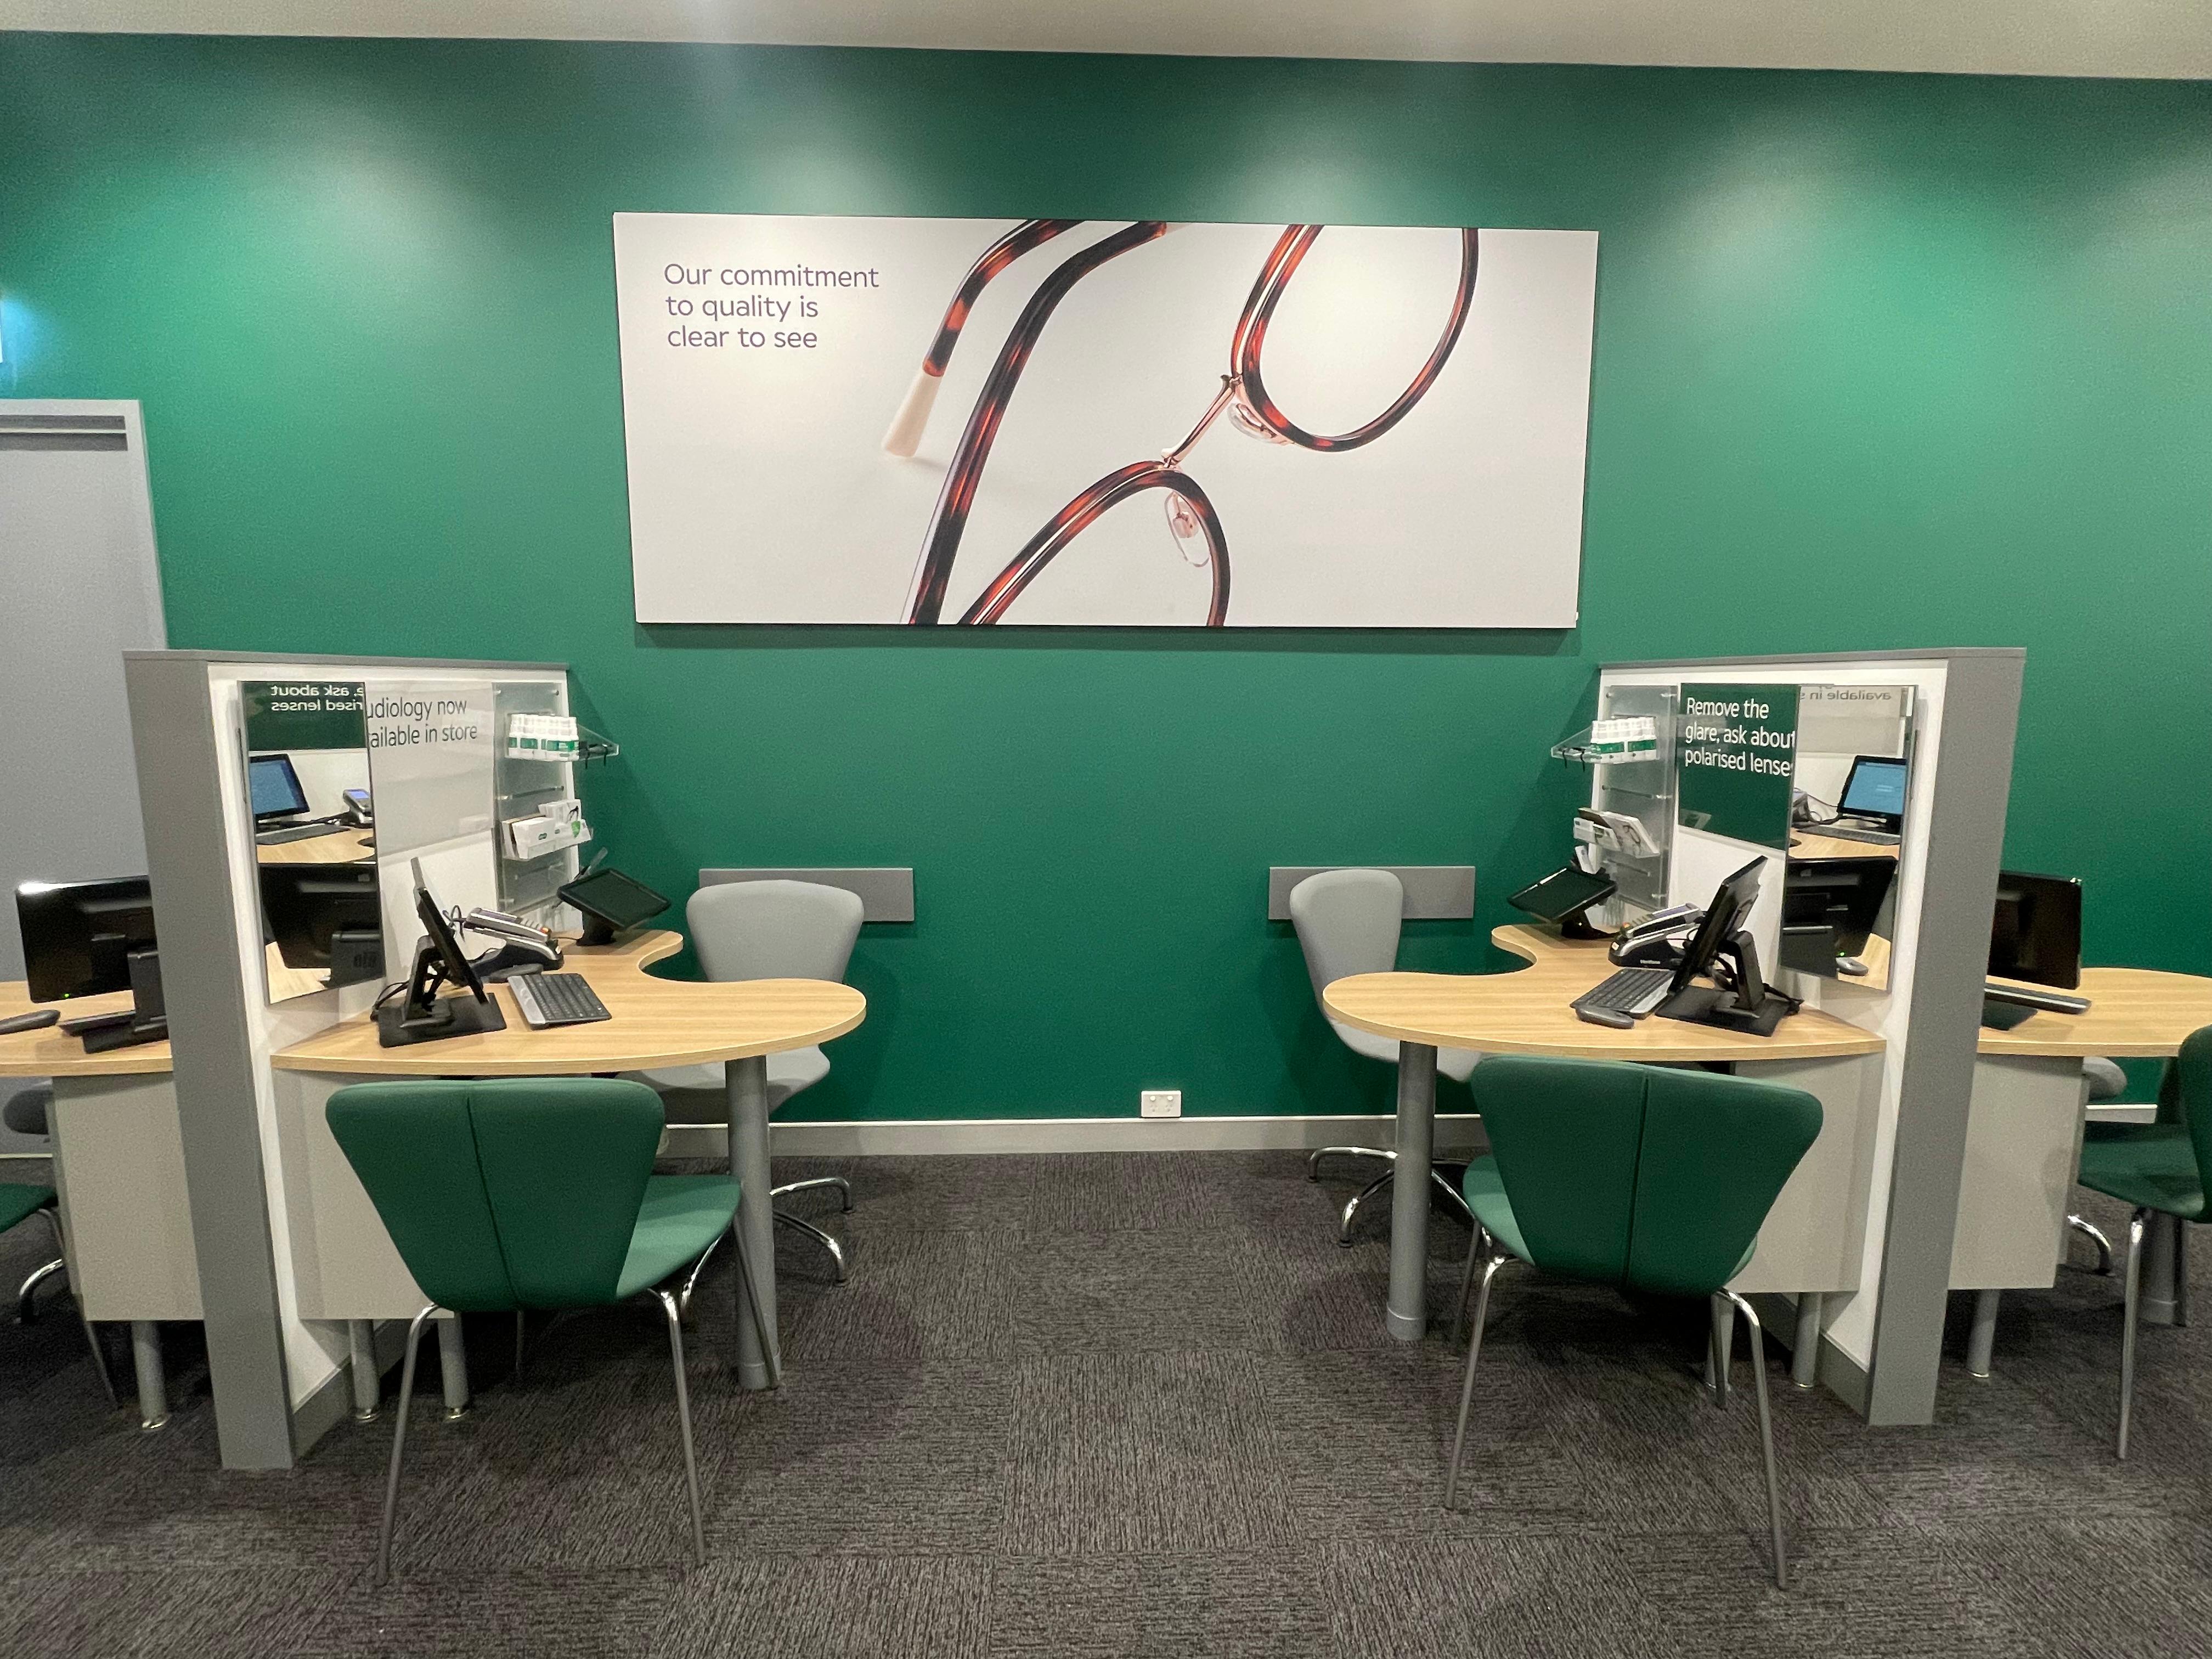 Images Specsavers Optometrists & Audiology - Queanbeyan - Riverside